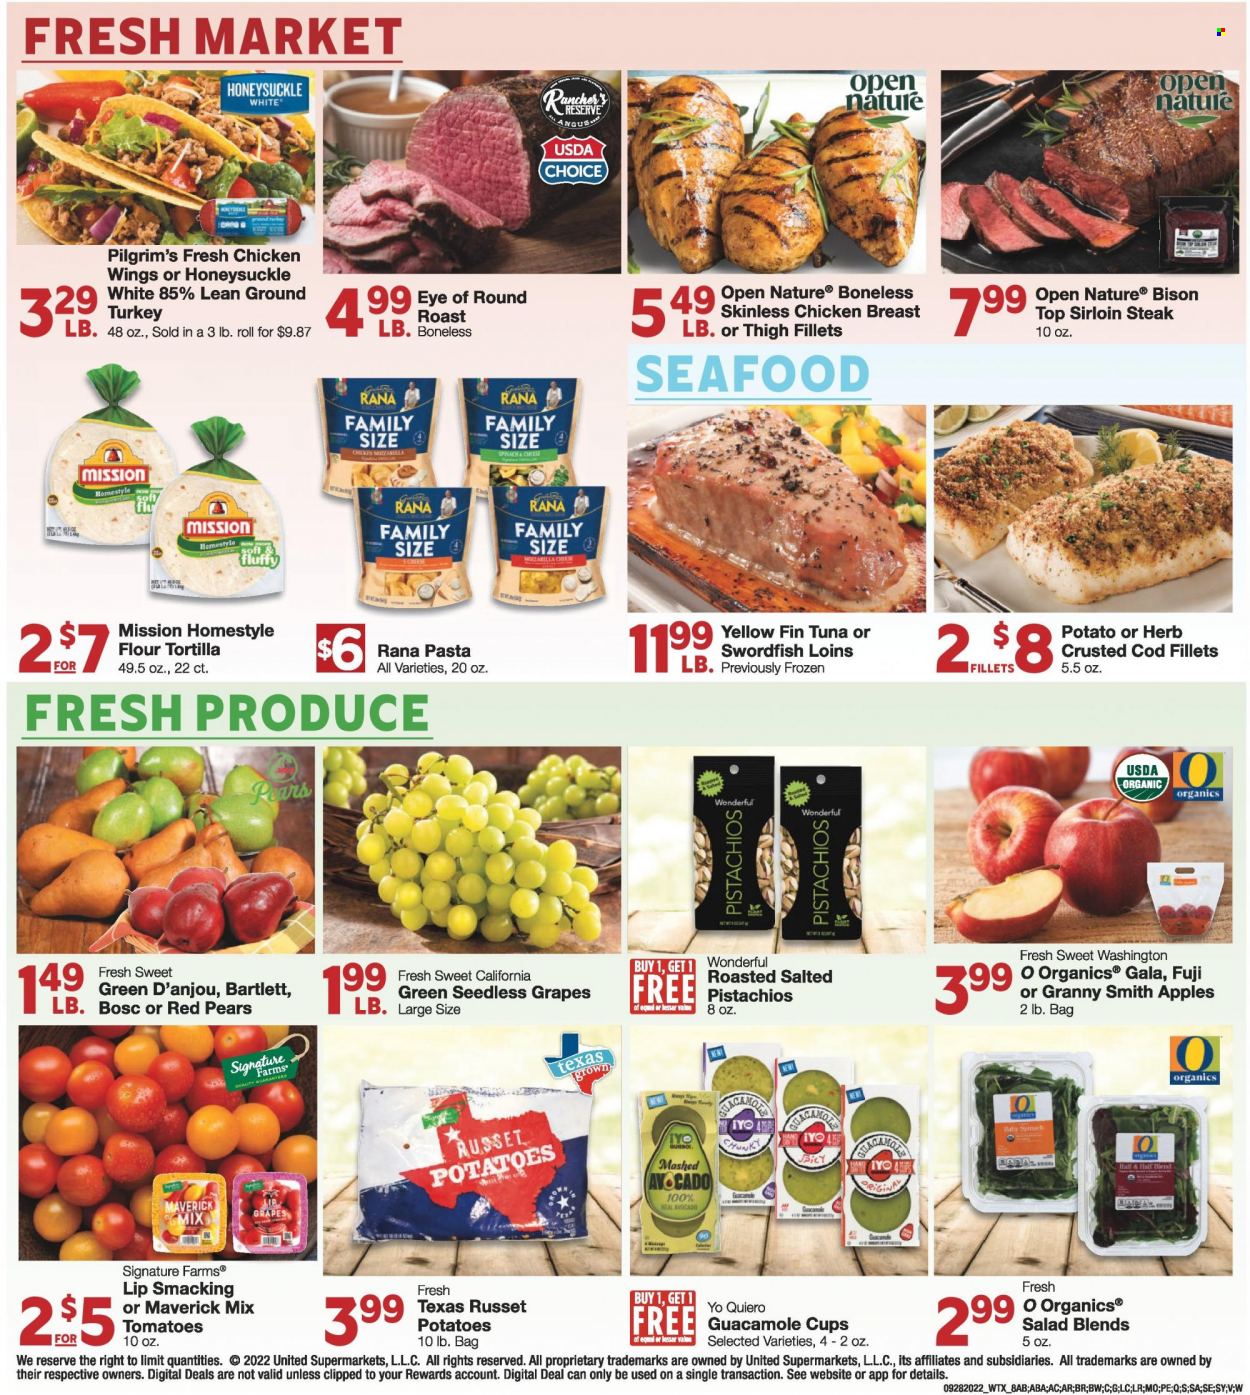 thumbnail - United Supermarkets Flyer - 09/28/2022 - 10/04/2022 - Sales products - tortillas, russet potatoes, tomatoes, potatoes, salad, apples, Gala, grapes, seedless grapes, pears, Granny Smith, ground turkey, chicken breasts, chicken wings, beef meat, beef sirloin, steak, eye of round, round roast, sirloin steak, bison meat, cod, swordfish, tuna, seafood, pasta, Rana, guacamole, mozzarella, pistachios, Rin, cup, Half and half. Page 8.